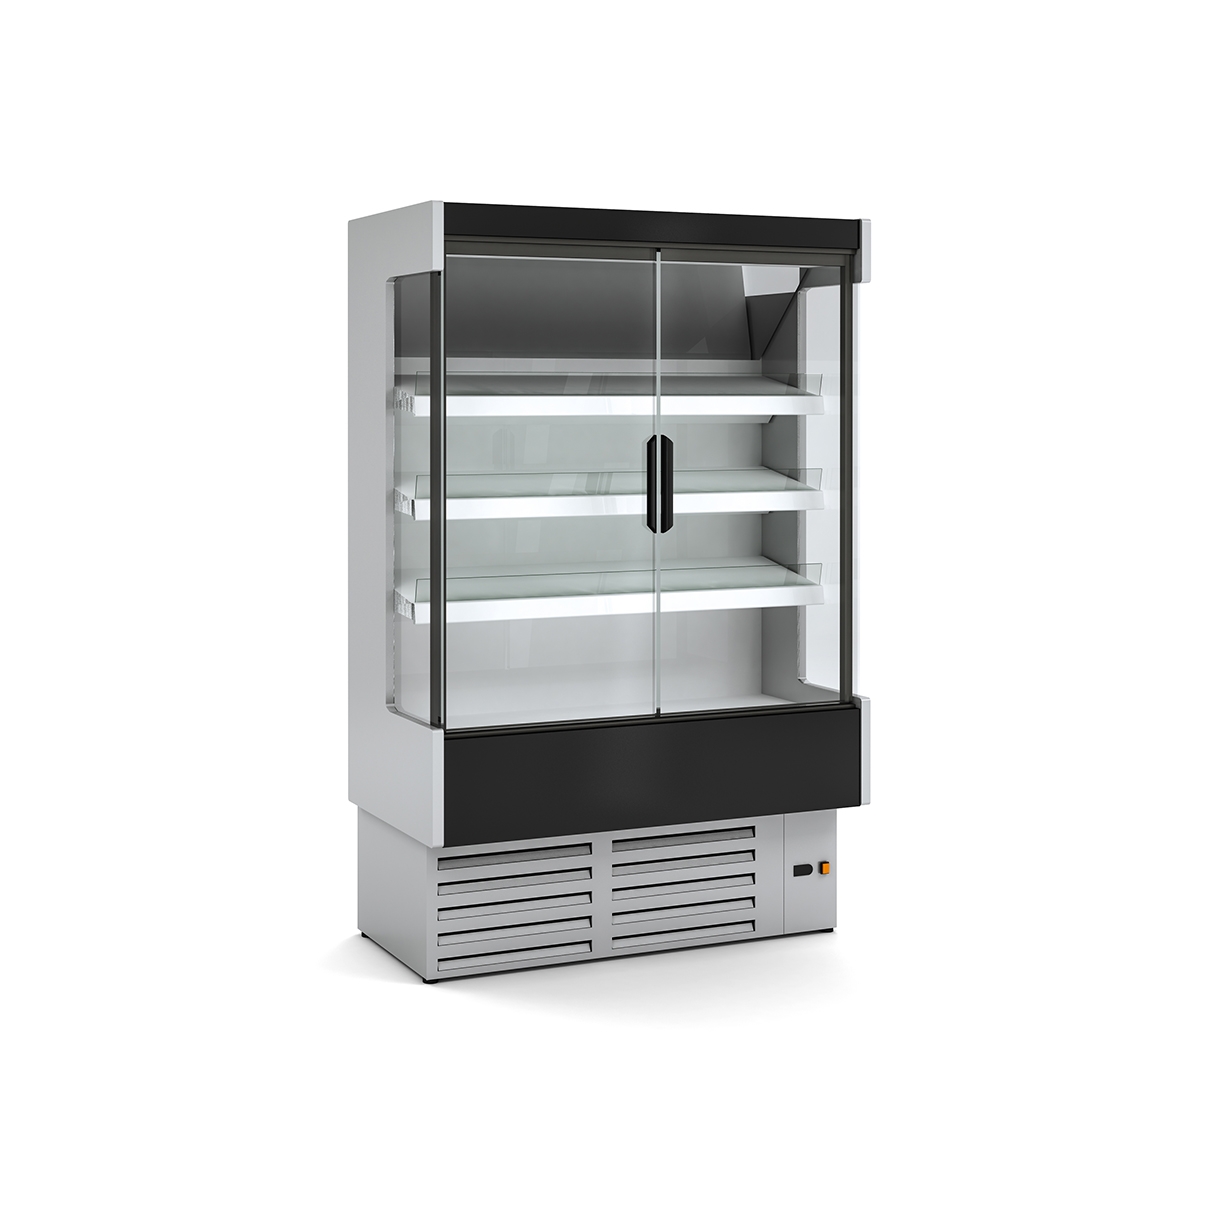 REFRIGERATED WALL CABINET DG1 H1